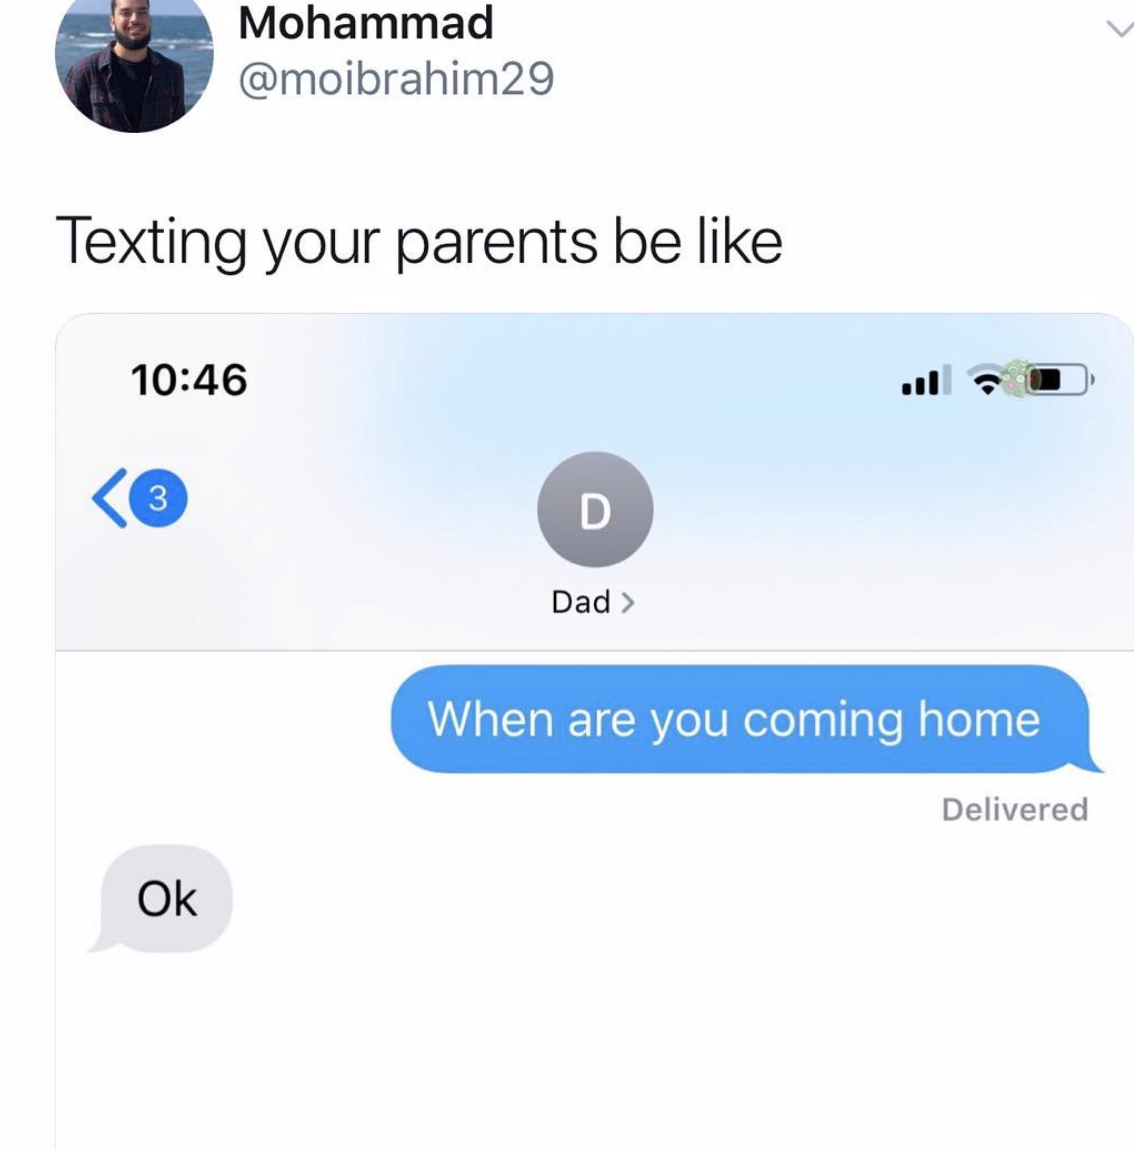 multimedia - Mohammad Texting your parents be D Dad > When are you coming home Delivered Ok